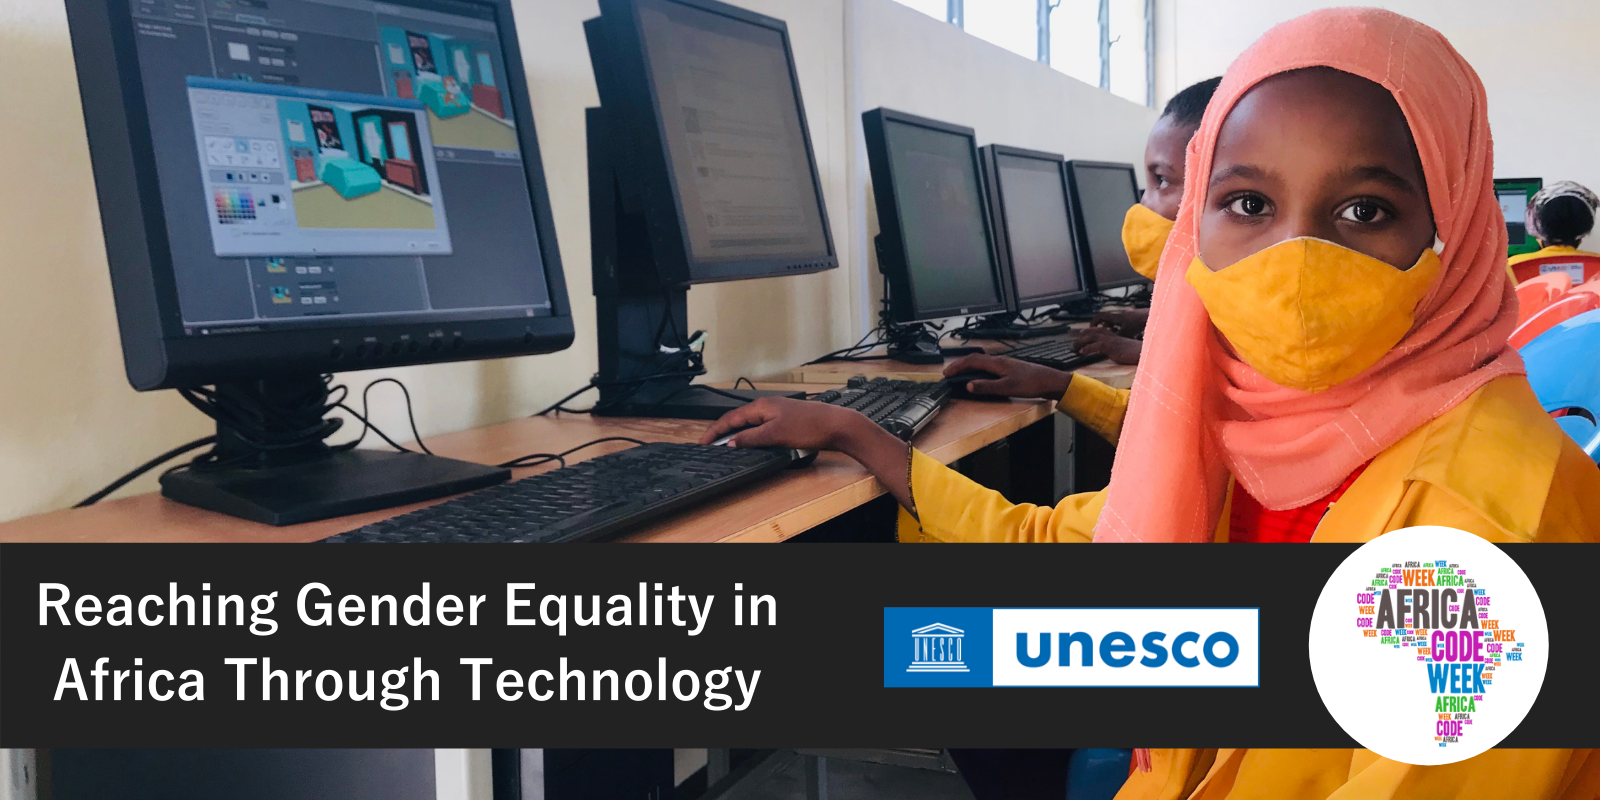 SAP AFRICA CODE WEEK USES MIL TO FOSTER GENDER EQUALITY IN TECHNOLOGY